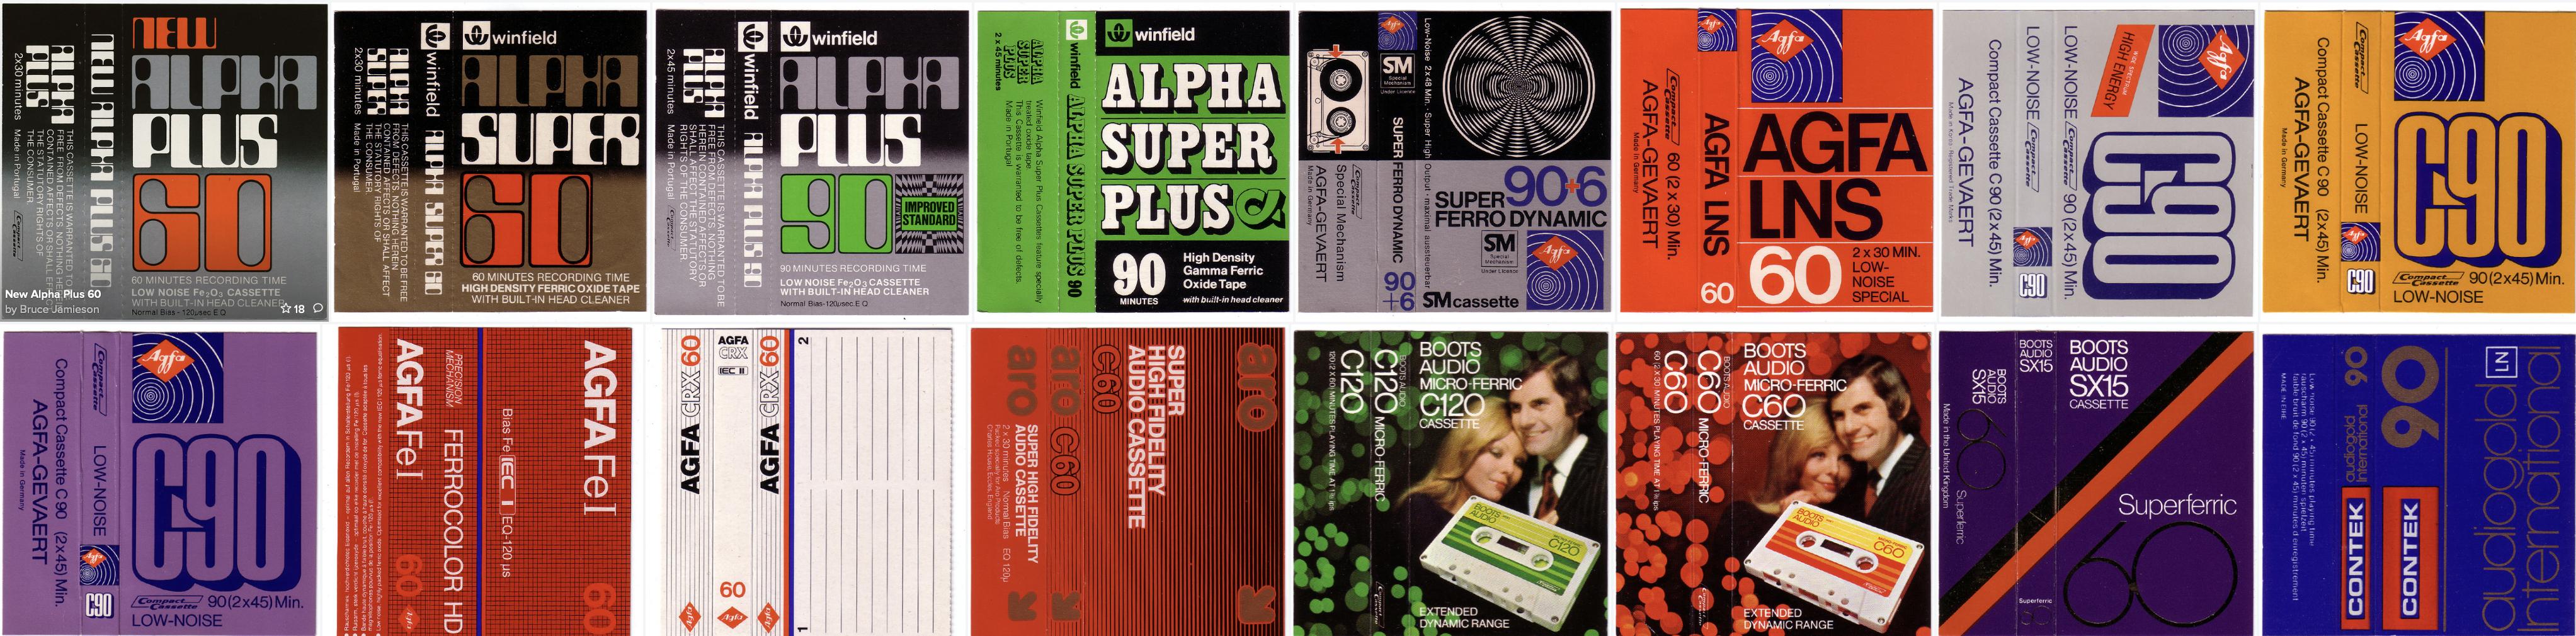 A collection of card tape inserts, including Memorex, Boots and Agfa brands.